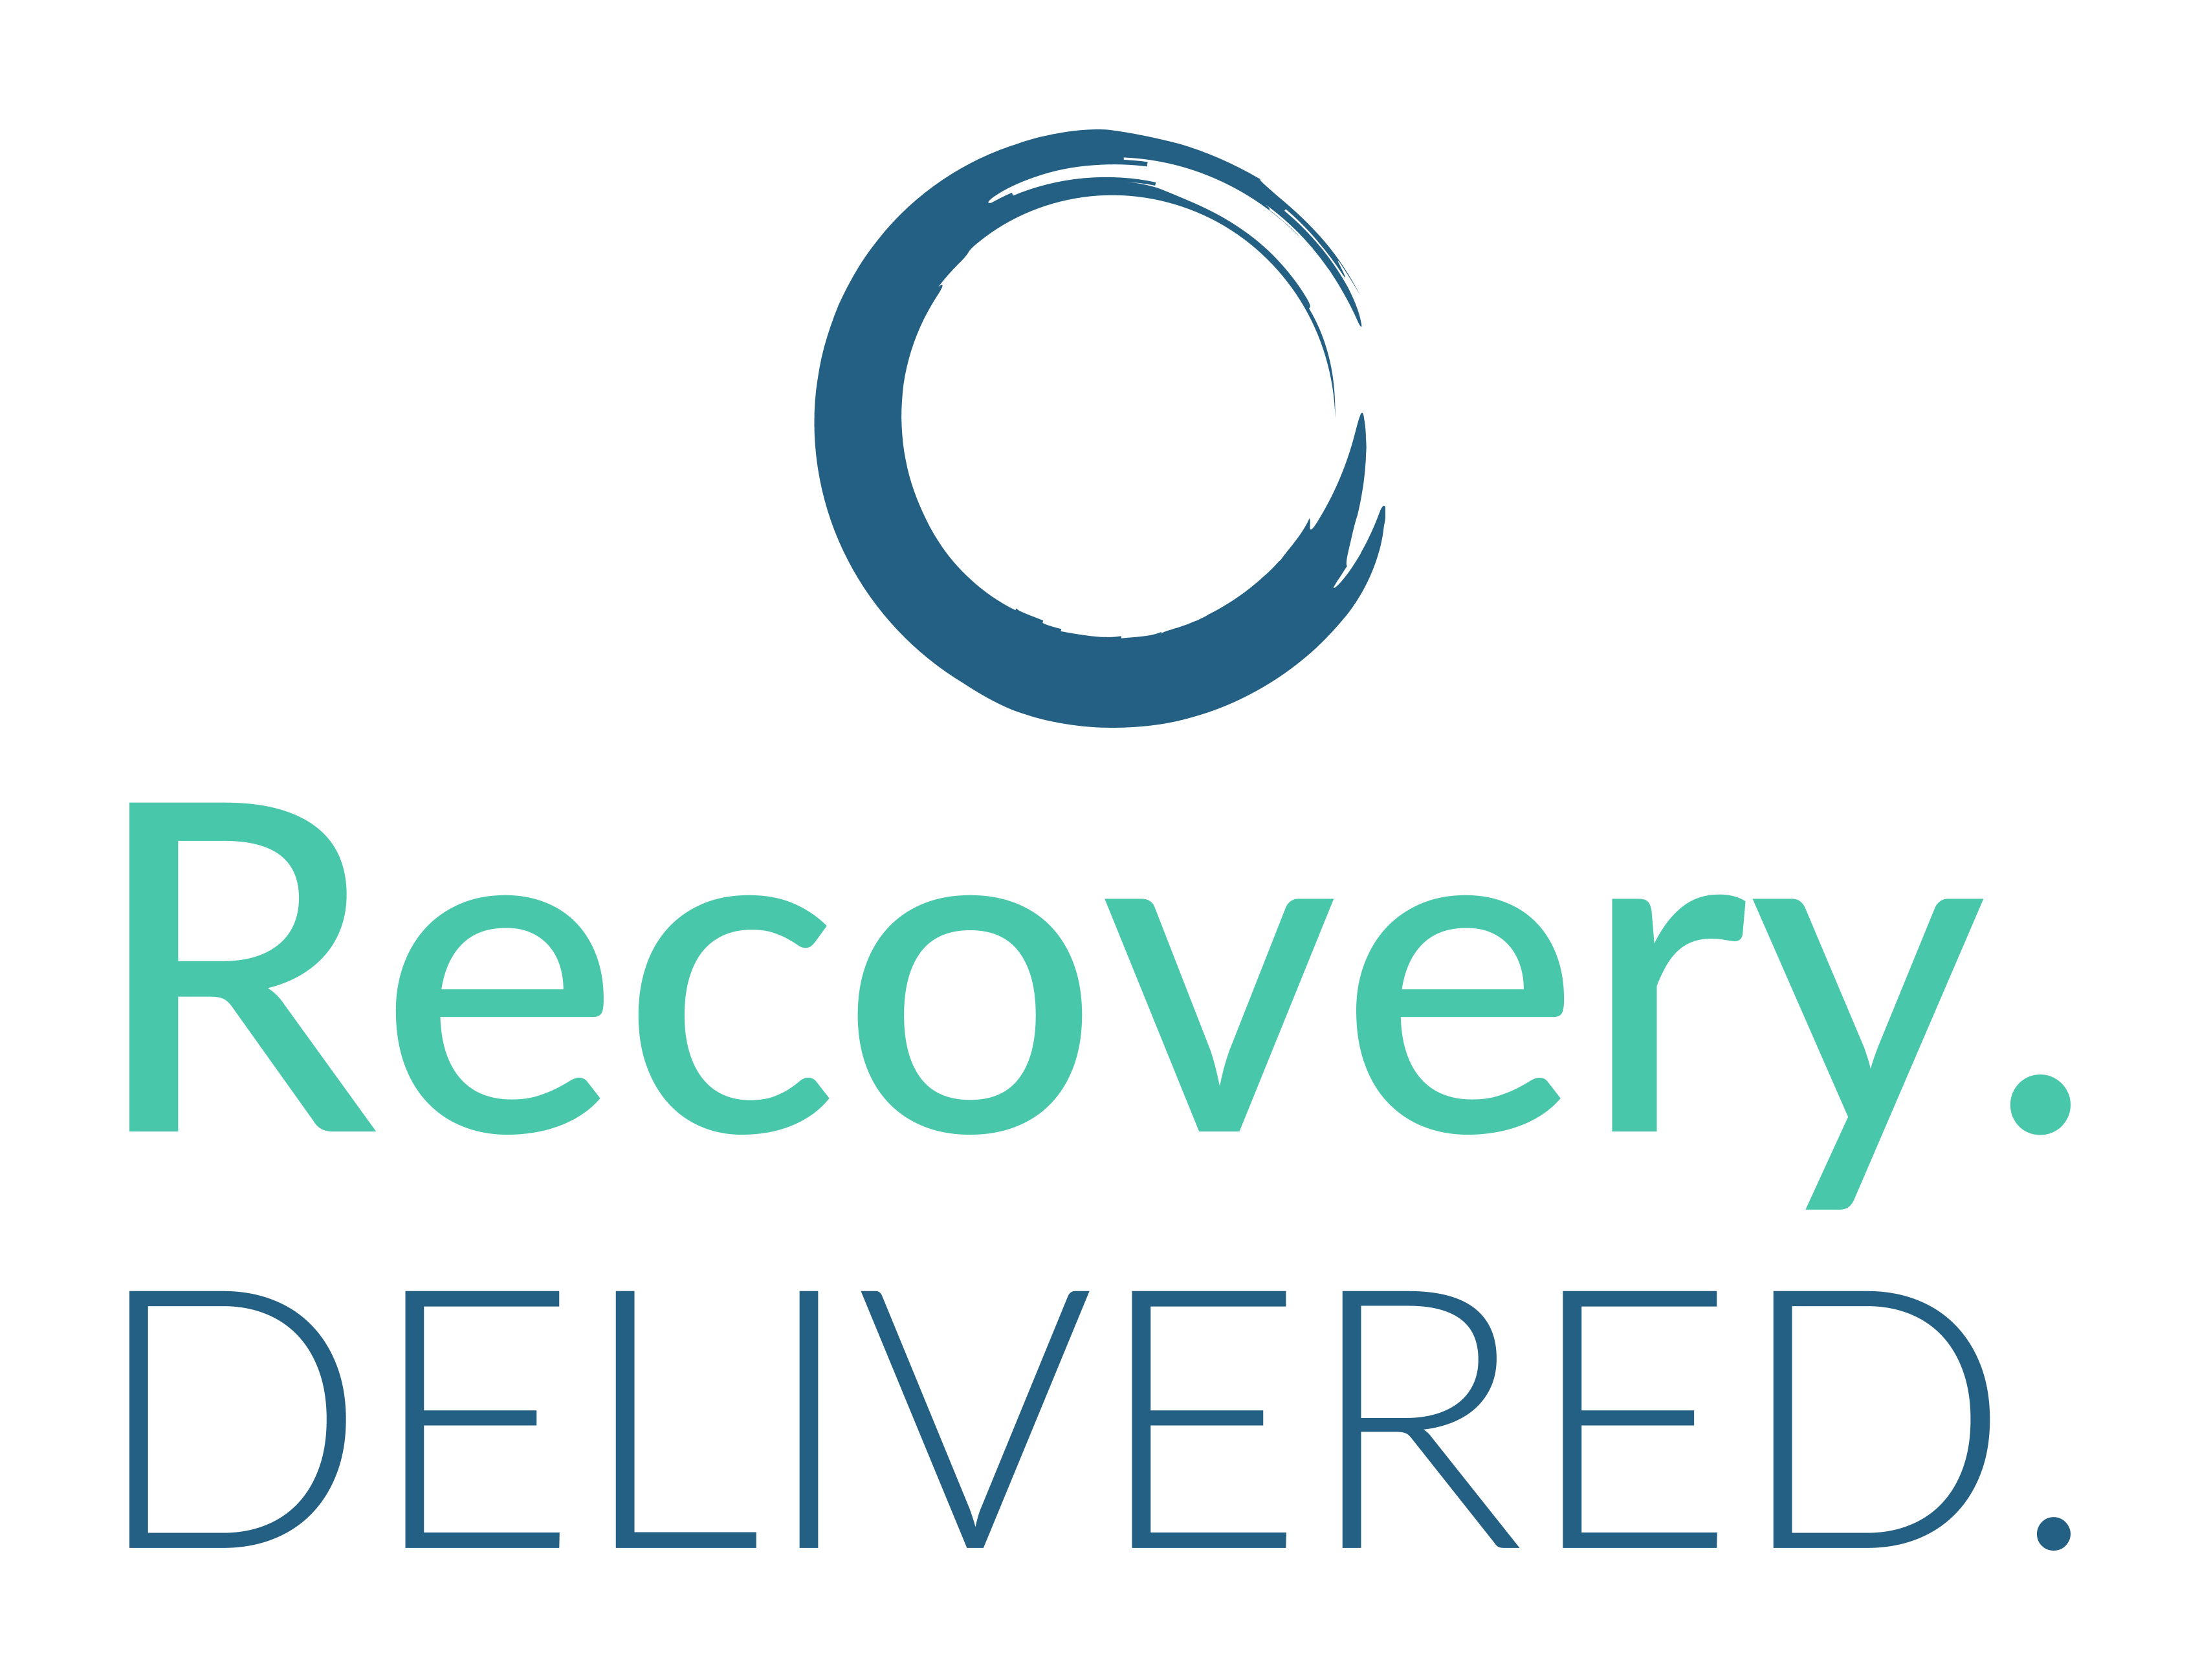 Recovery Delivered Launches New Website Aimed at Taking Addiction Treatment  Online to Increase Success Rate When Treating the Opioid Epidemic